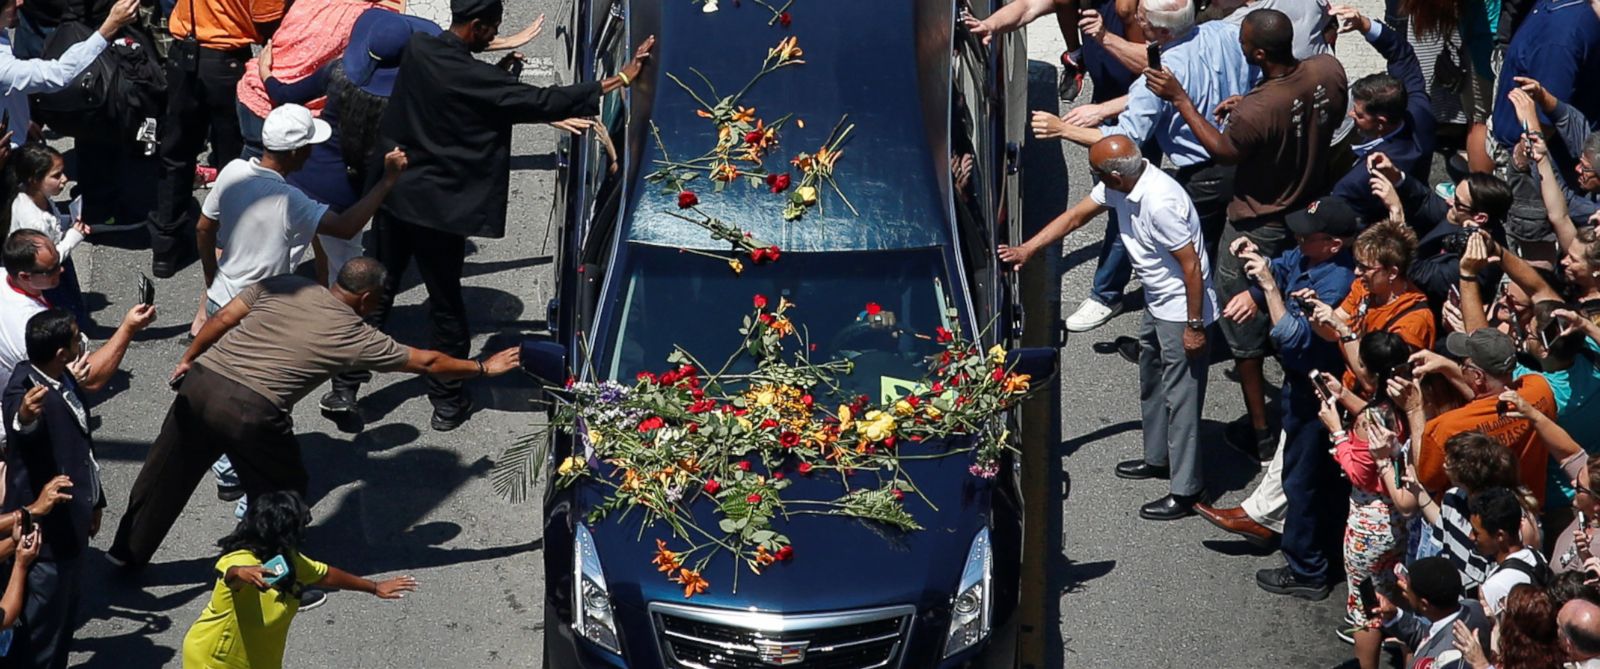 PHOTO: Well-wishers touch the hearse carrying the body of the late boxing champion